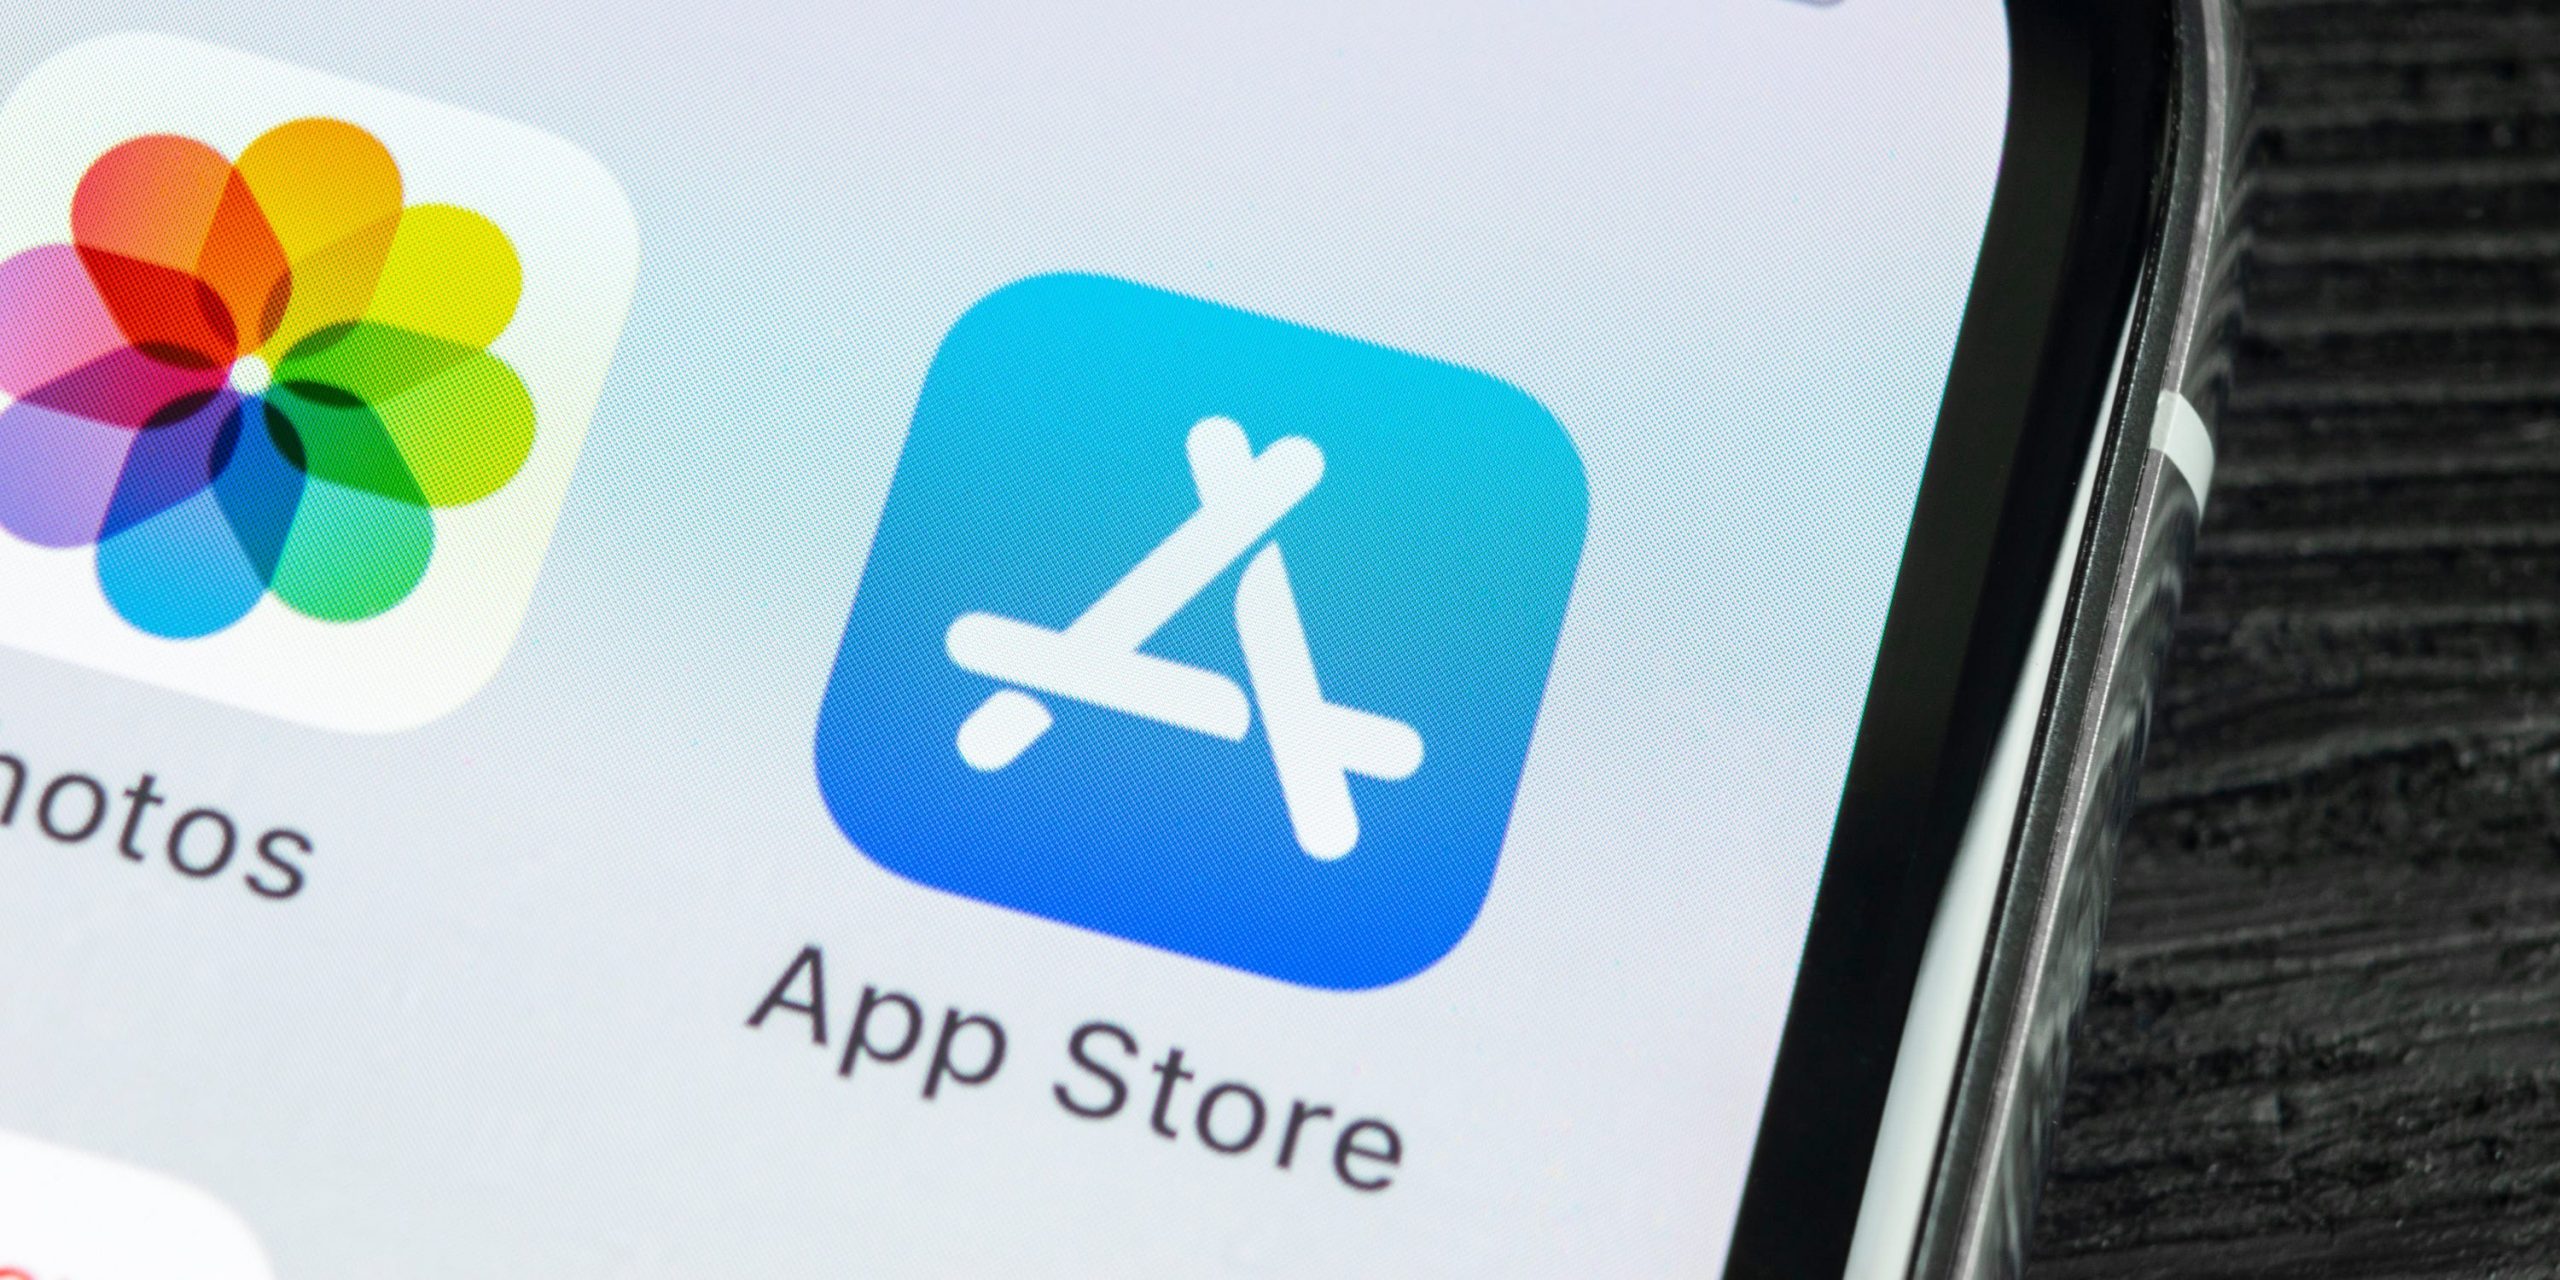 The App Store icon on an iPhone.